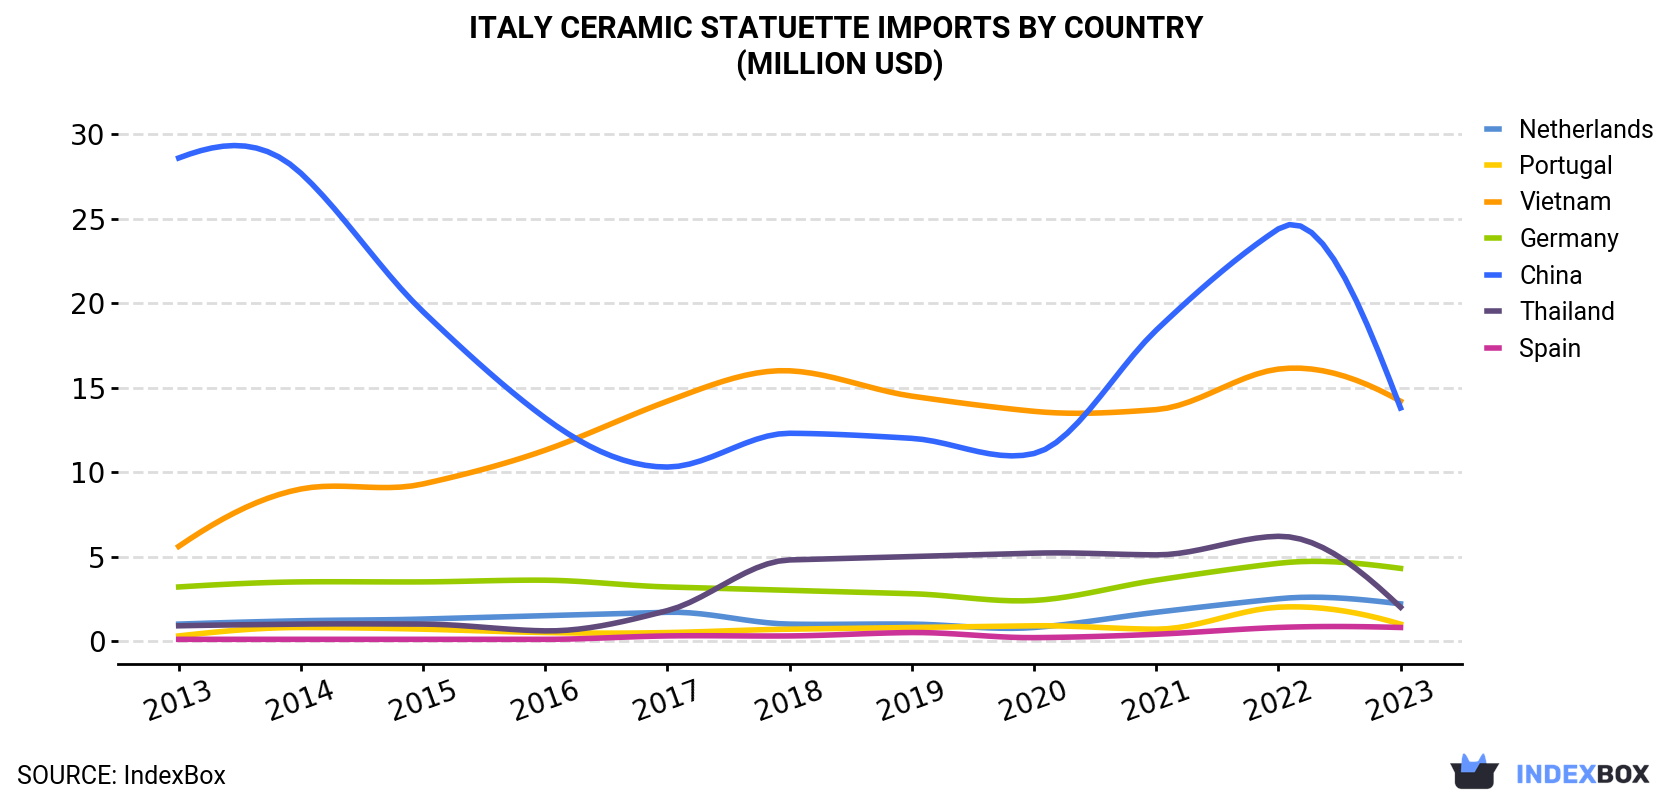 Italy Ceramic Statuette Imports By Country (Million USD)